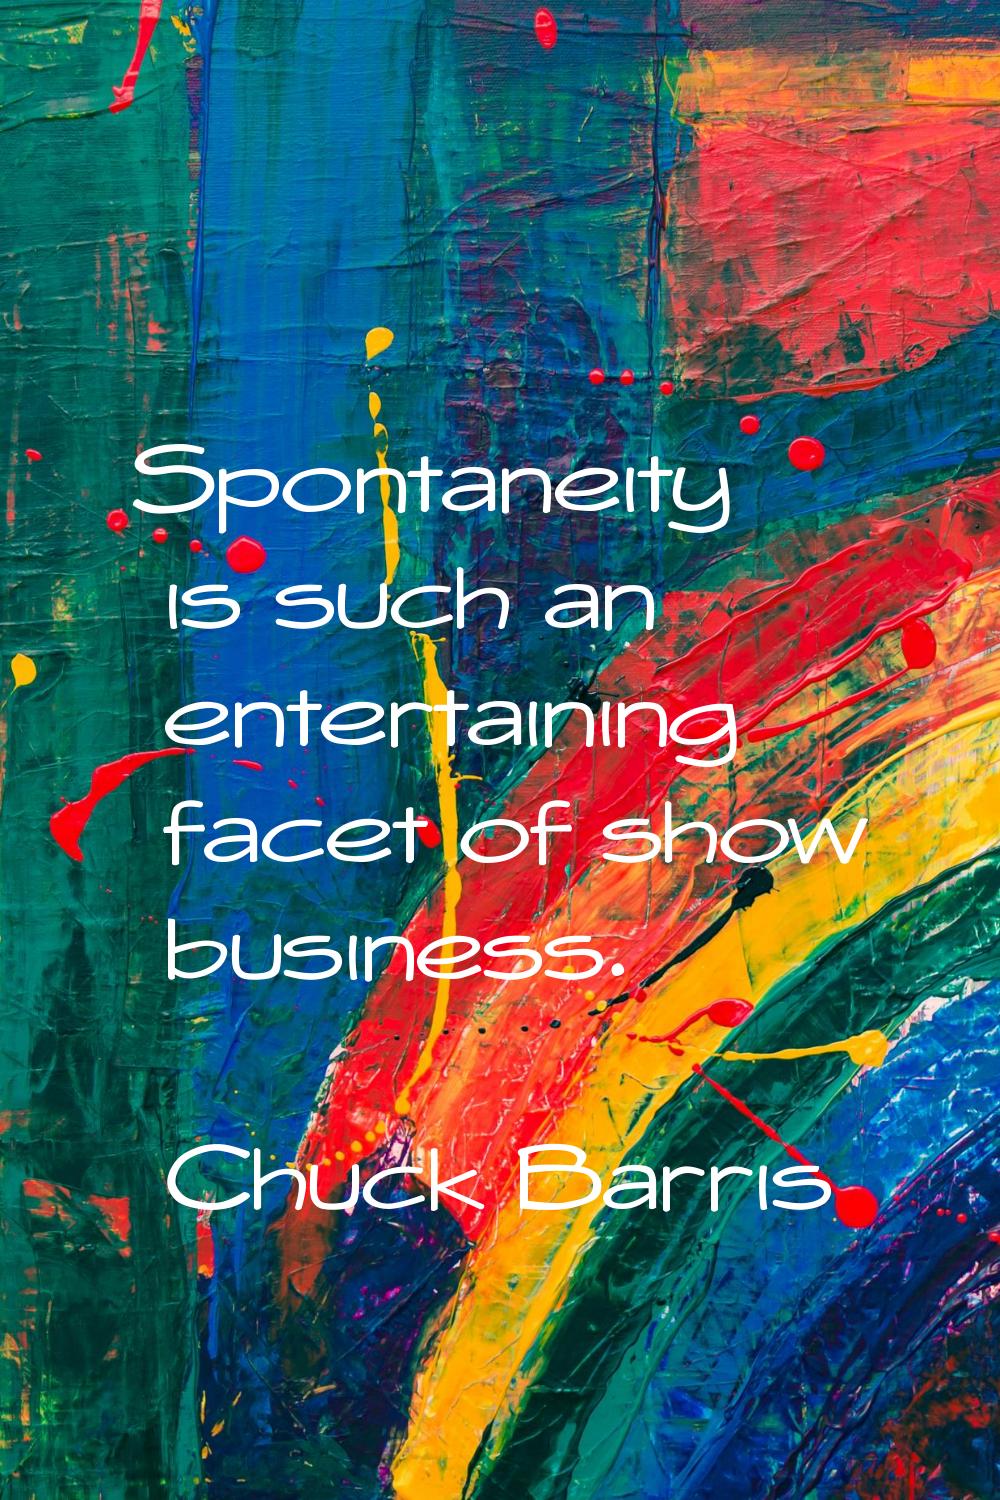 Spontaneity is such an entertaining facet of show business.